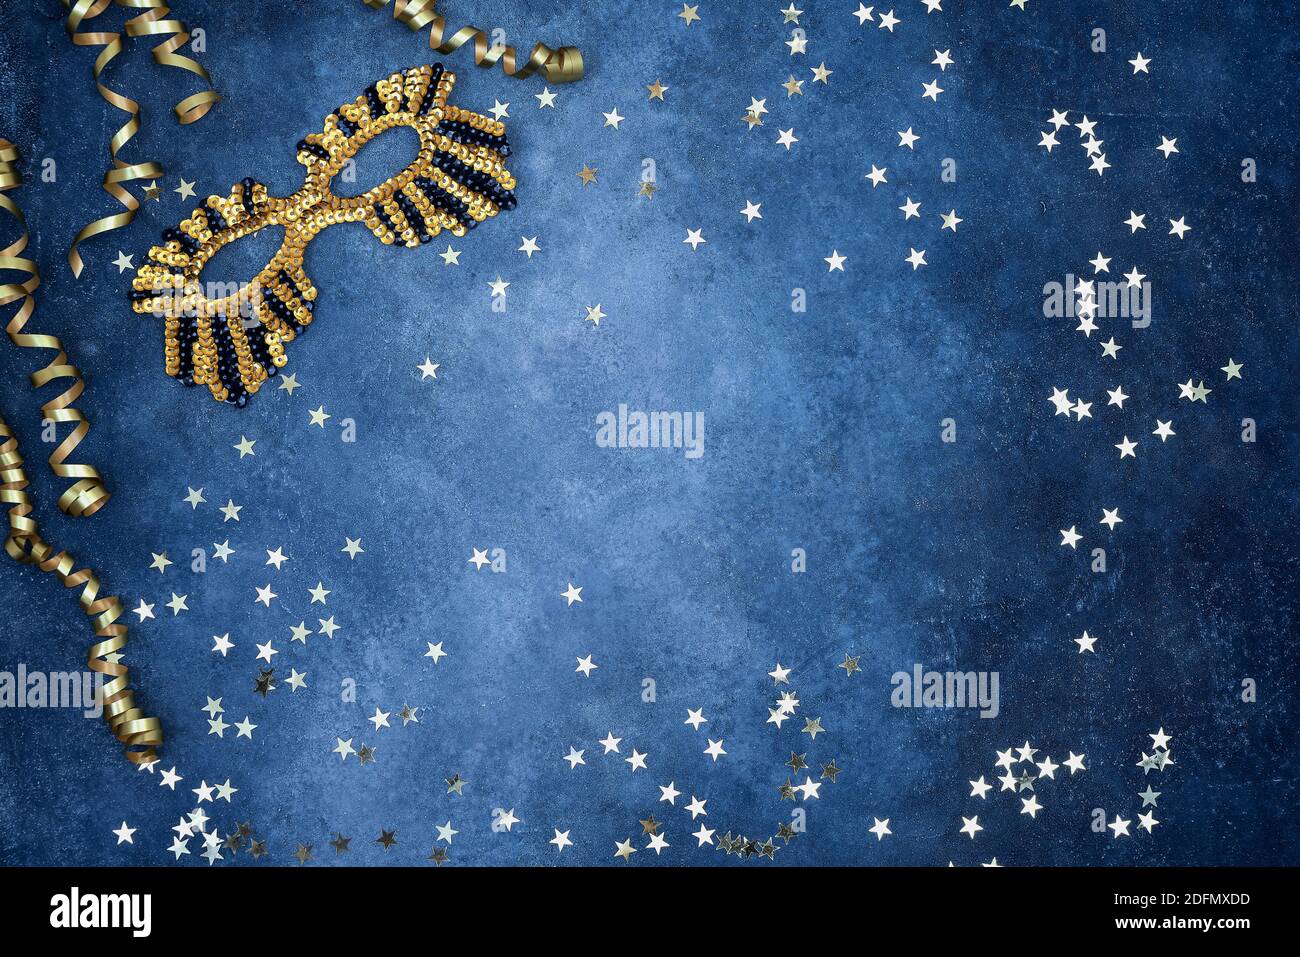 Golden glittering mask and party streamers with golden stars on a blue background. Top view, copy space. Carnival party celebration concept. Stock Photo